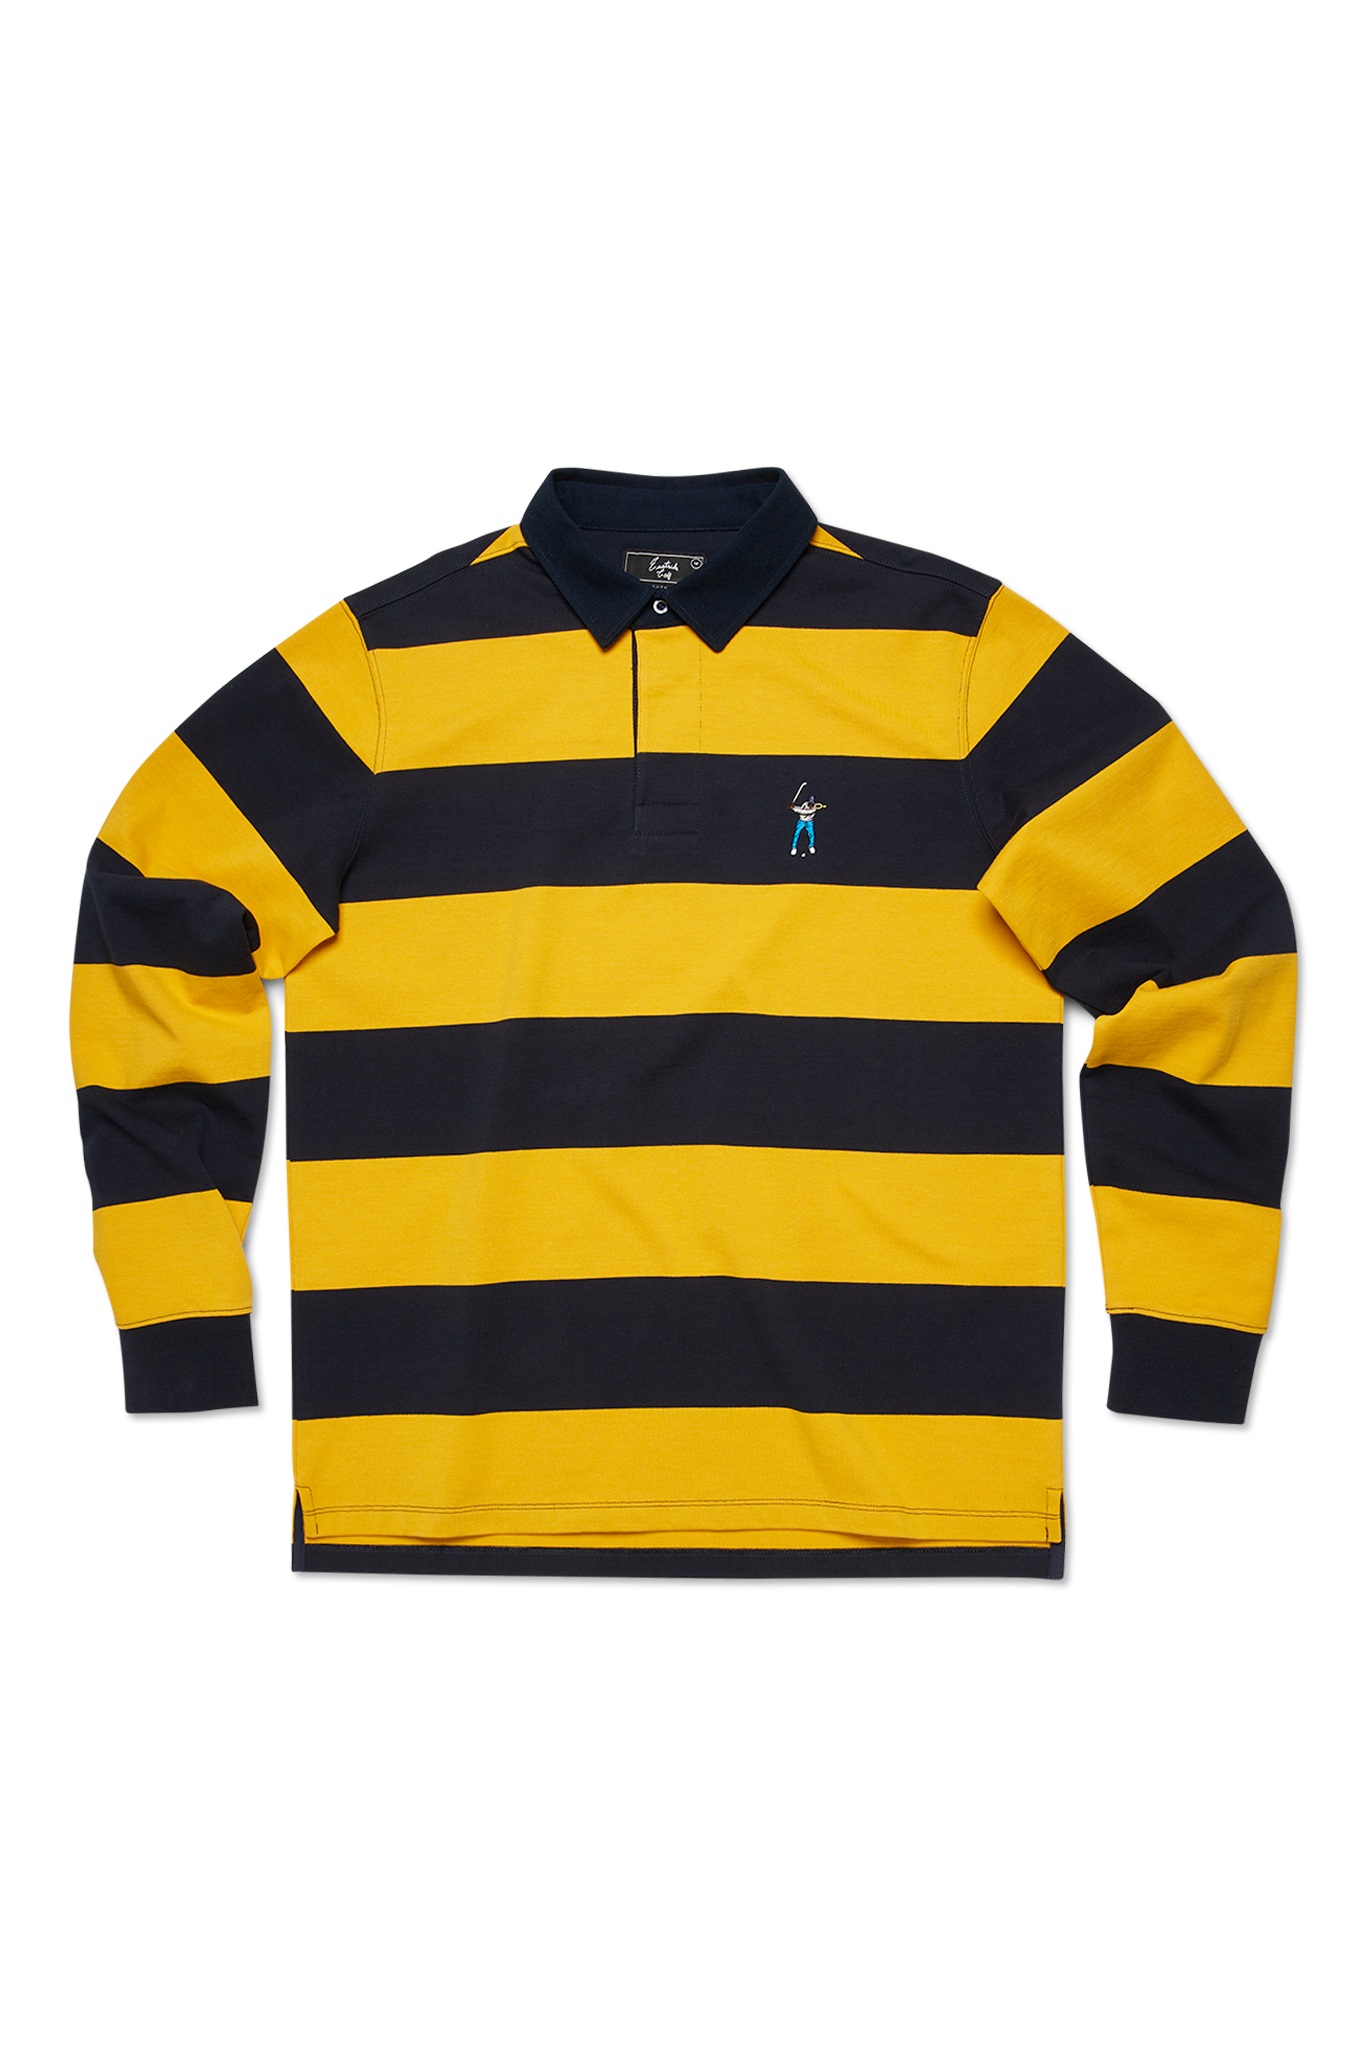 Eastside Golf Men's Long Sleeve Striped Rugby Midnight Old Gold